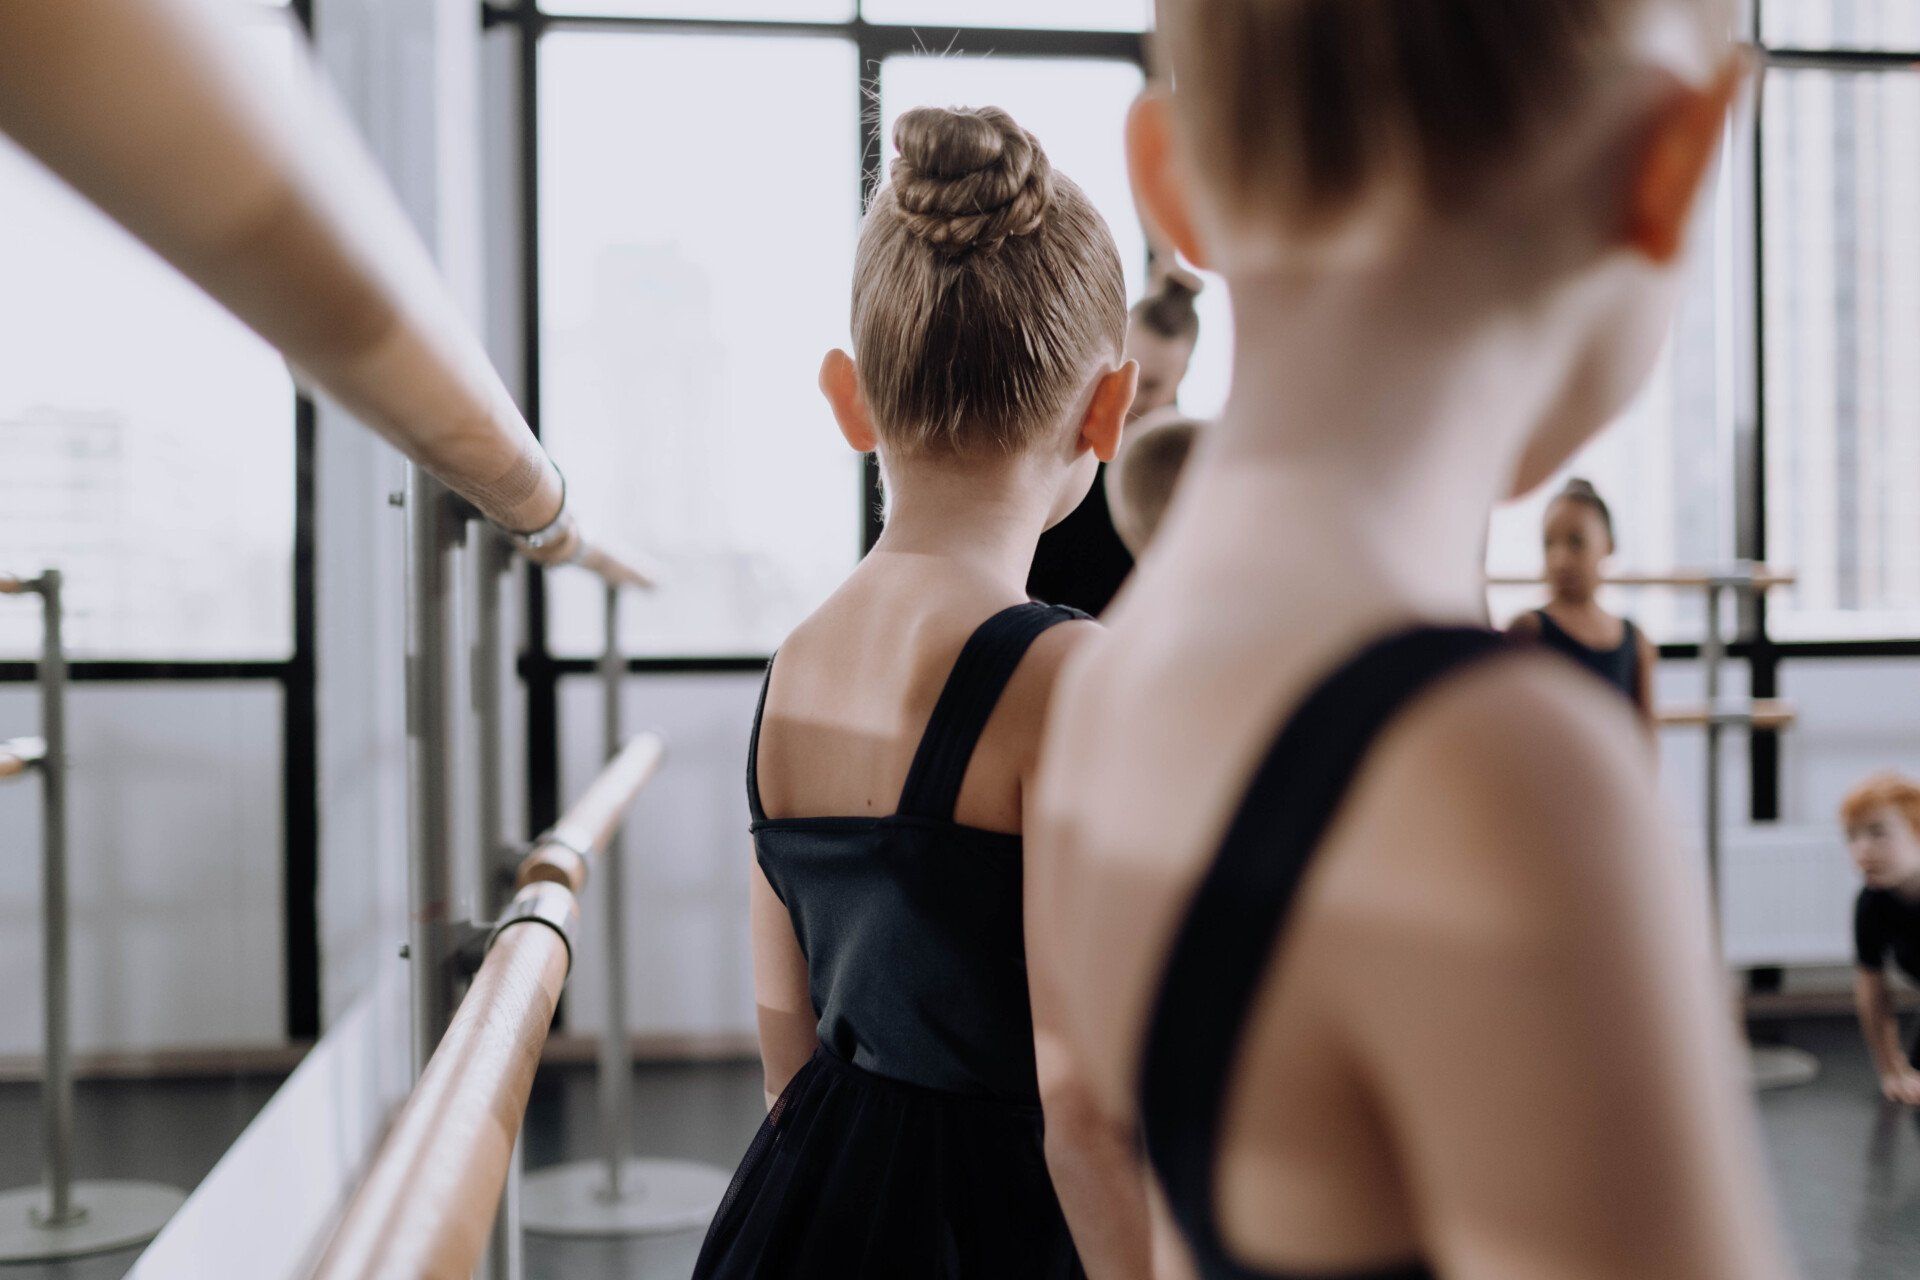 Ballet dancers standing with their backs to the camer in front of a large mirror